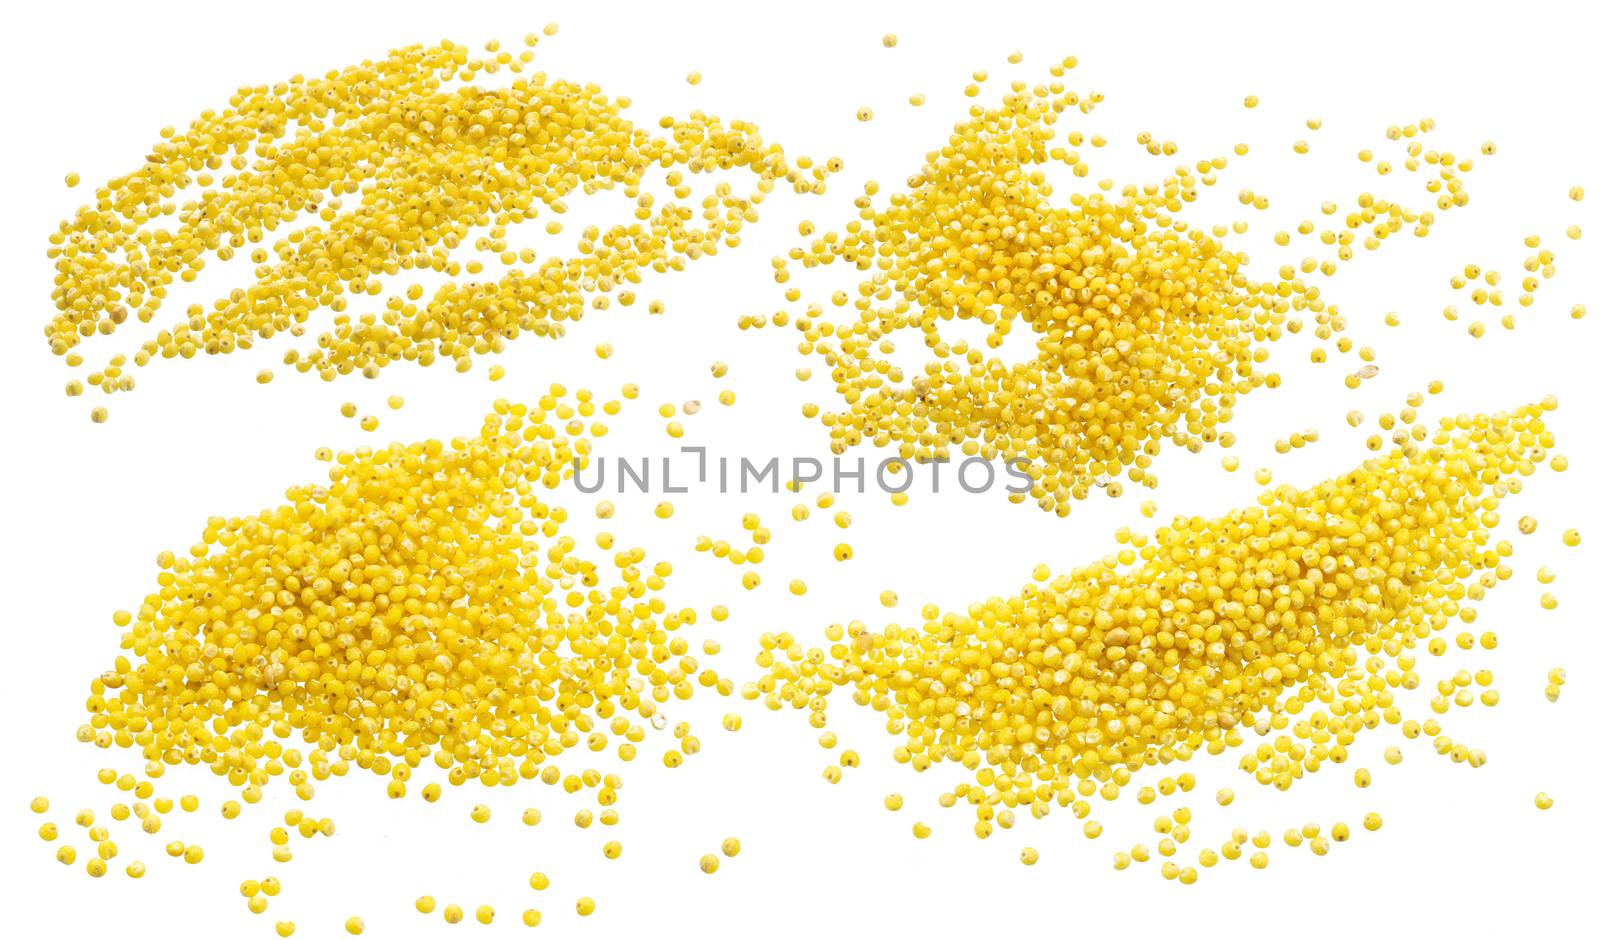 Millet seeds isolated on white background by xamtiw